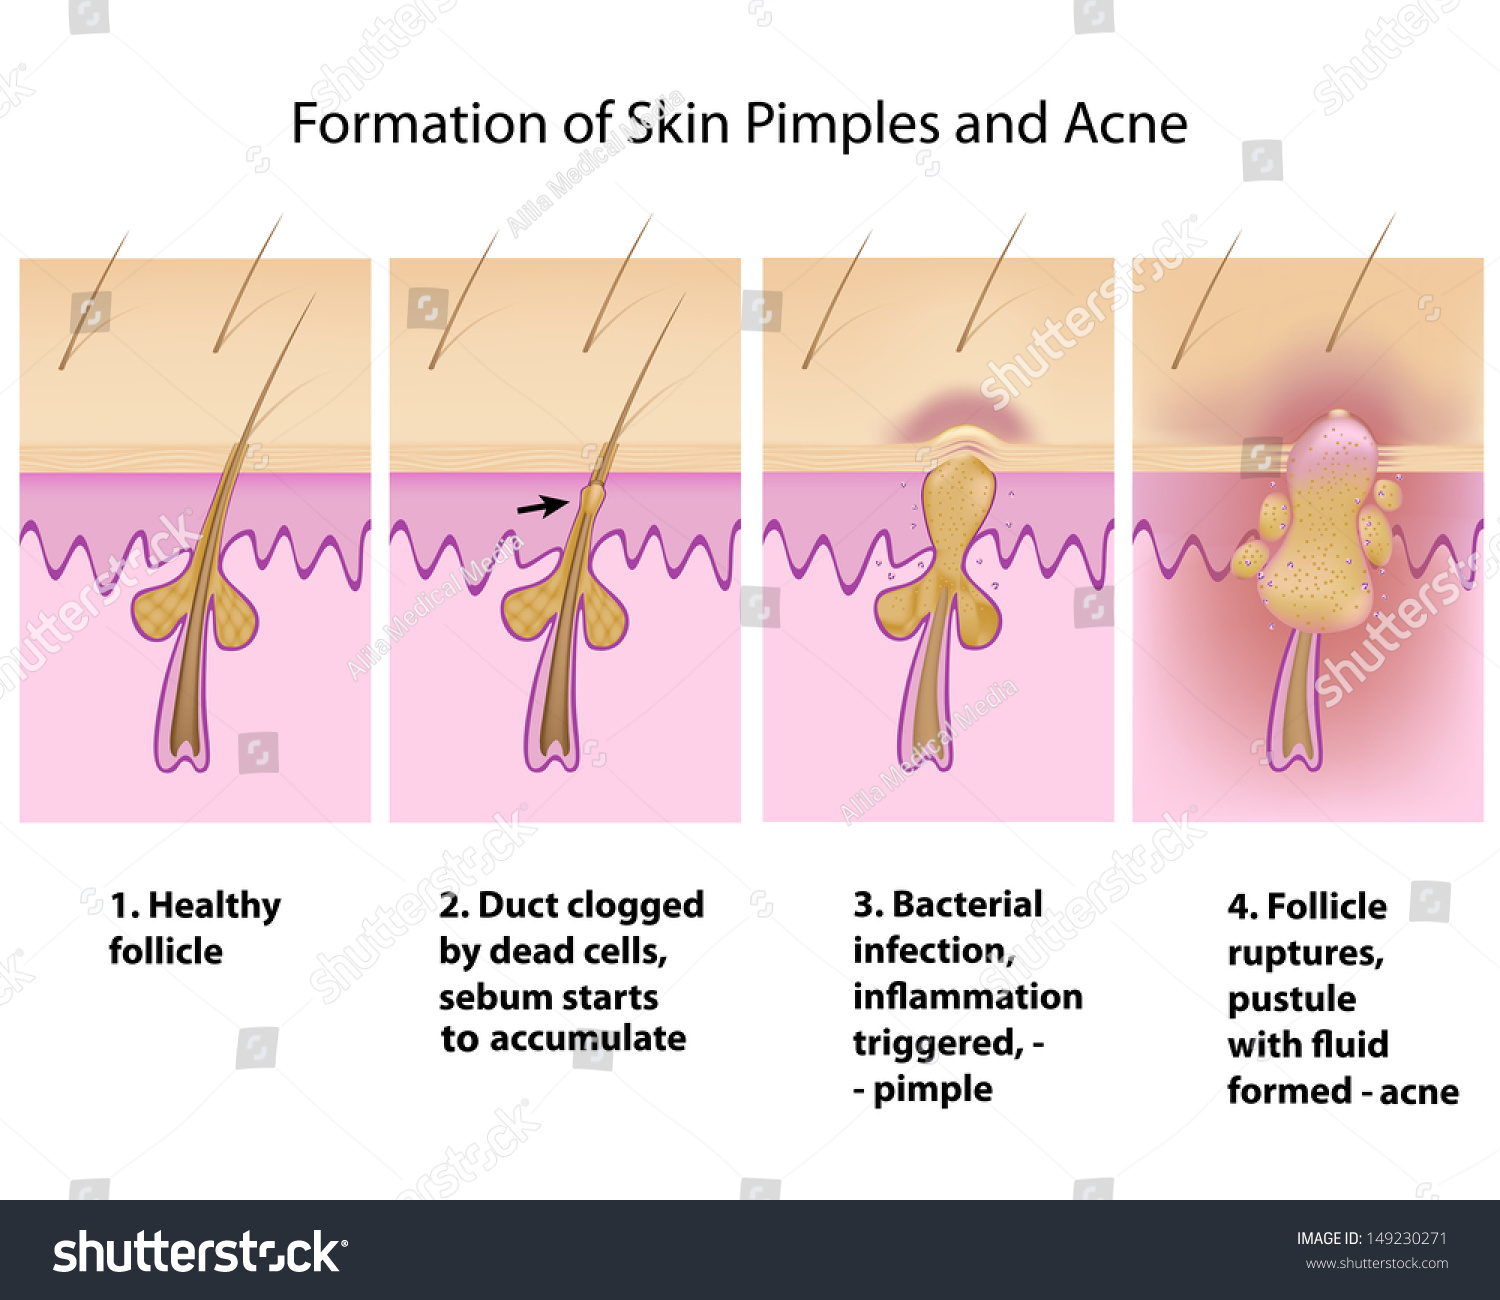 Formation Of Skin Acnes And Pimples Stock Photo 149230271 : Shutterstock